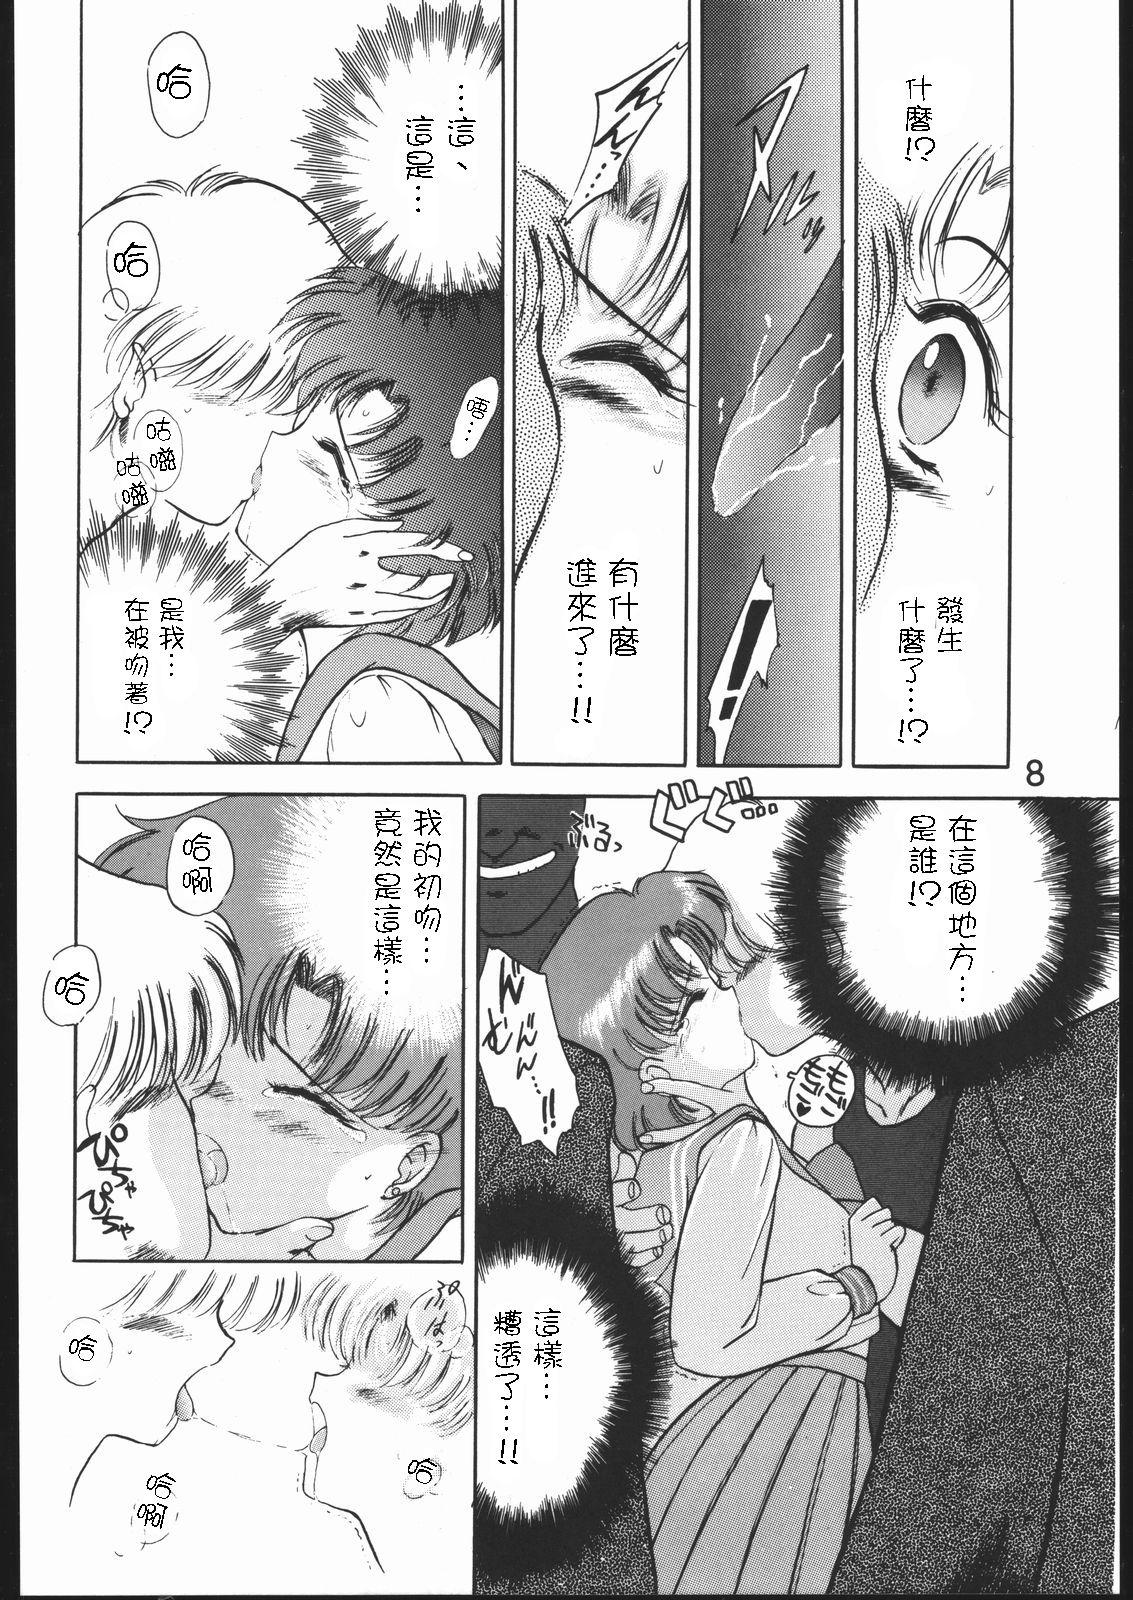 Sexy Whores SUBMISSION MERCURY PLUS - Sailor moon Stepfamily - Page 8